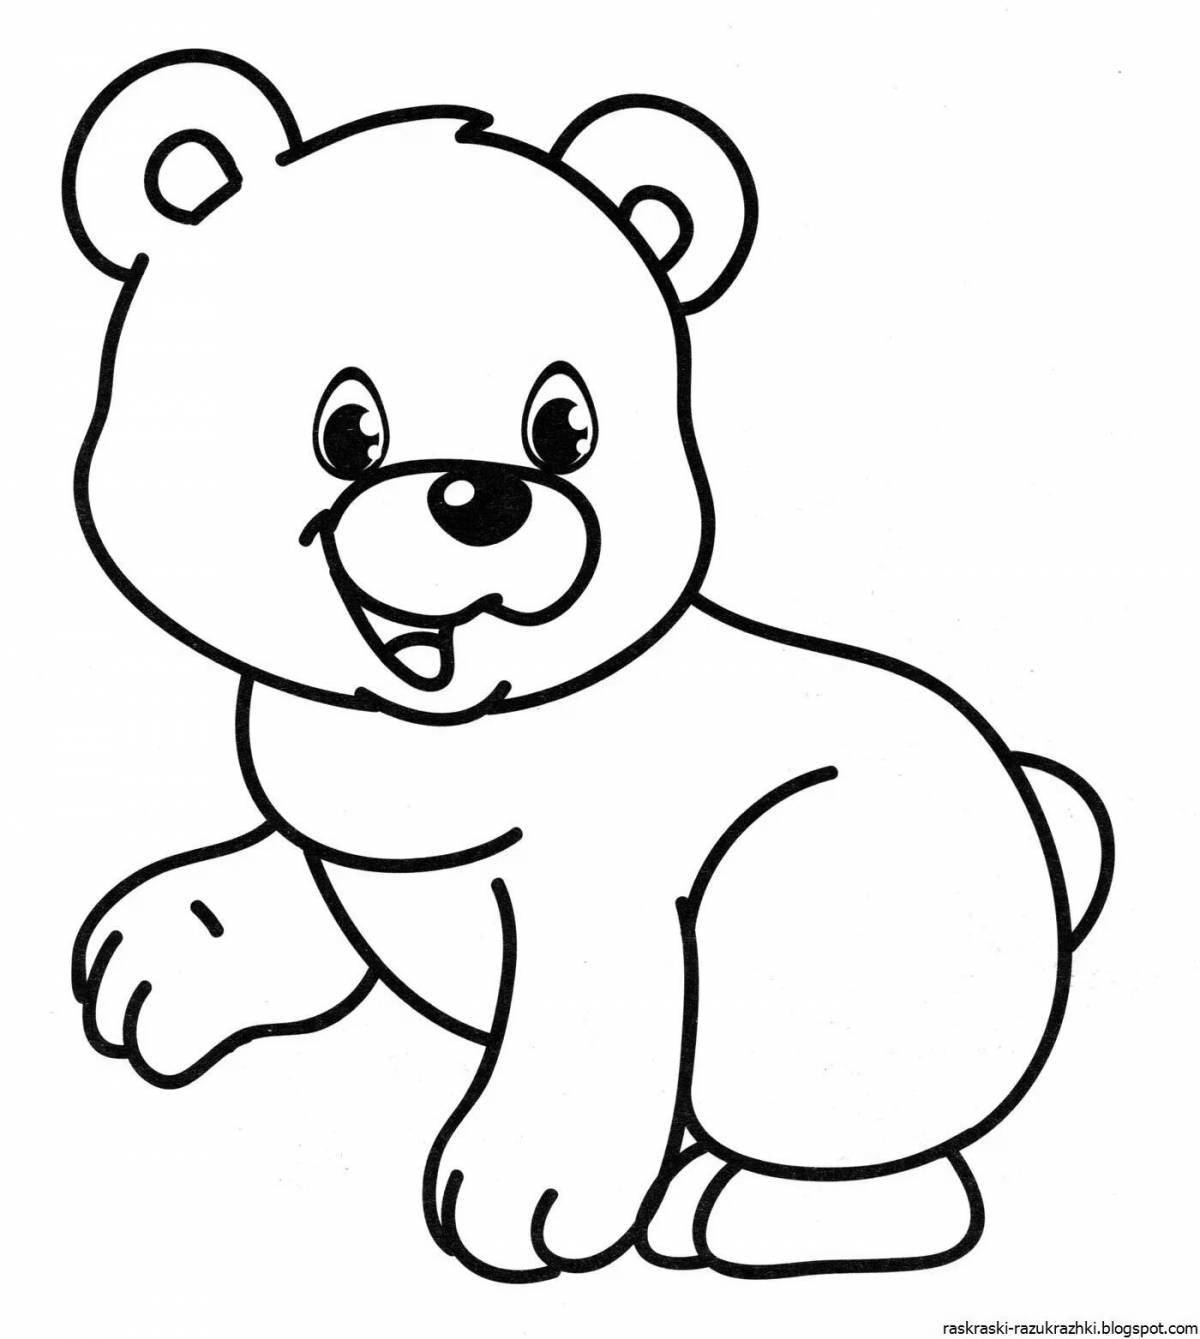 Gorgeous teddy bear coloring book for 2-3 year olds